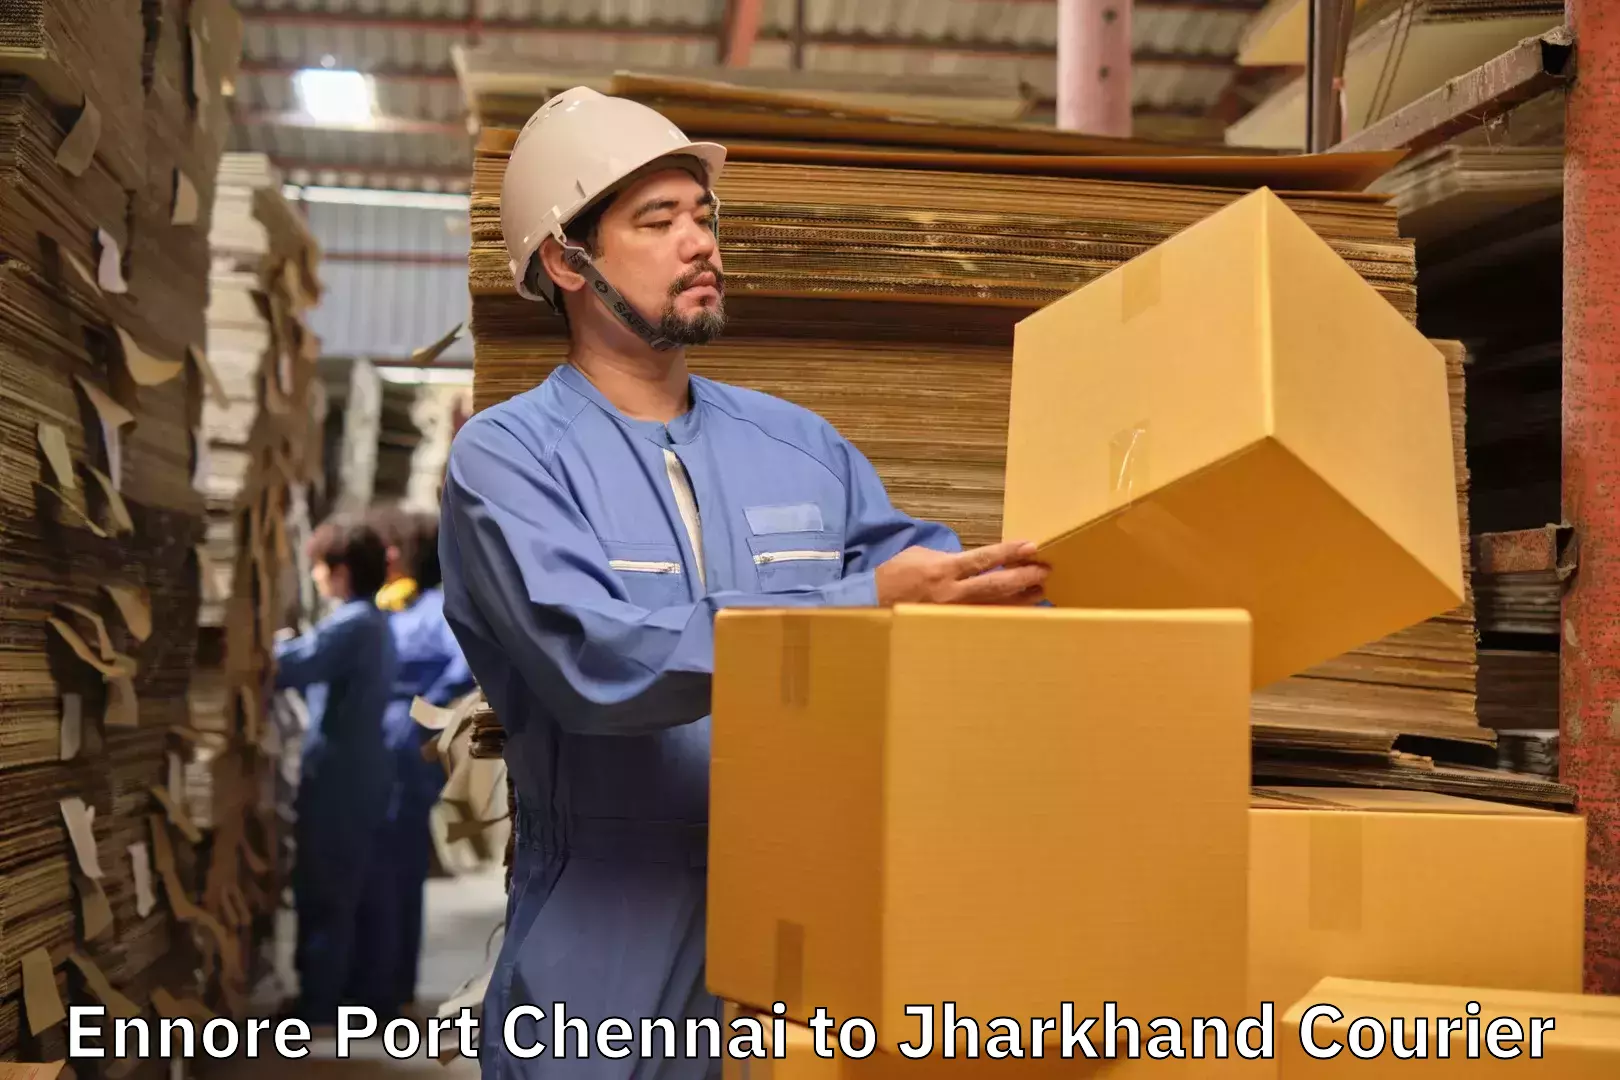 Baggage shipping experience Ennore Port Chennai to Chatra